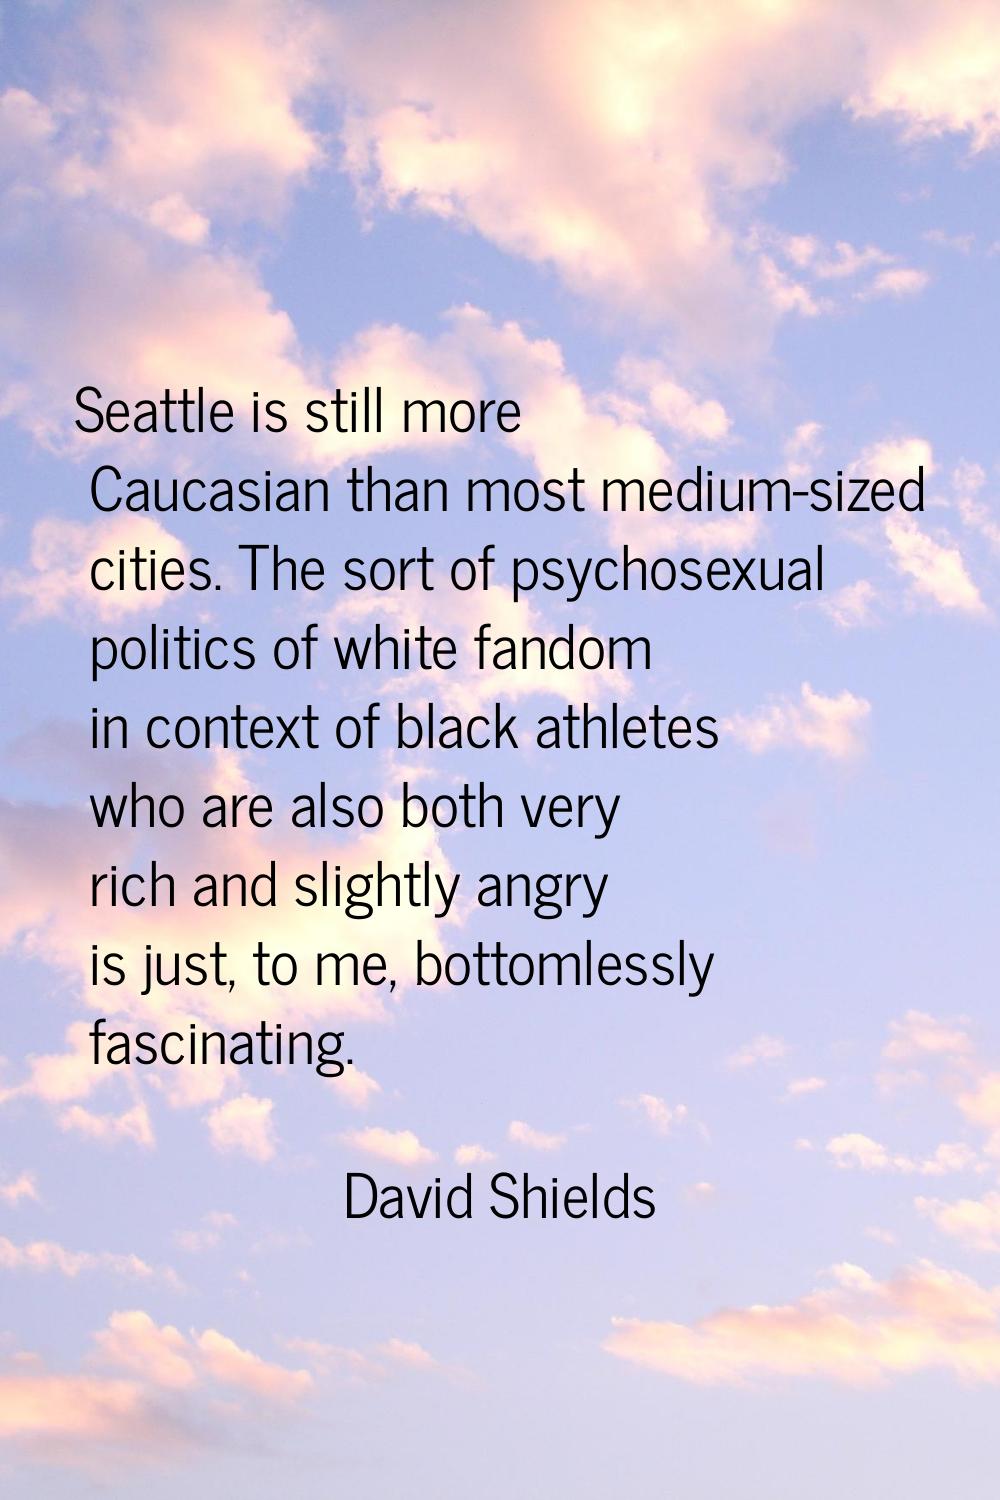 Seattle is still more Caucasian than most medium-sized cities. The sort of psychosexual politics of